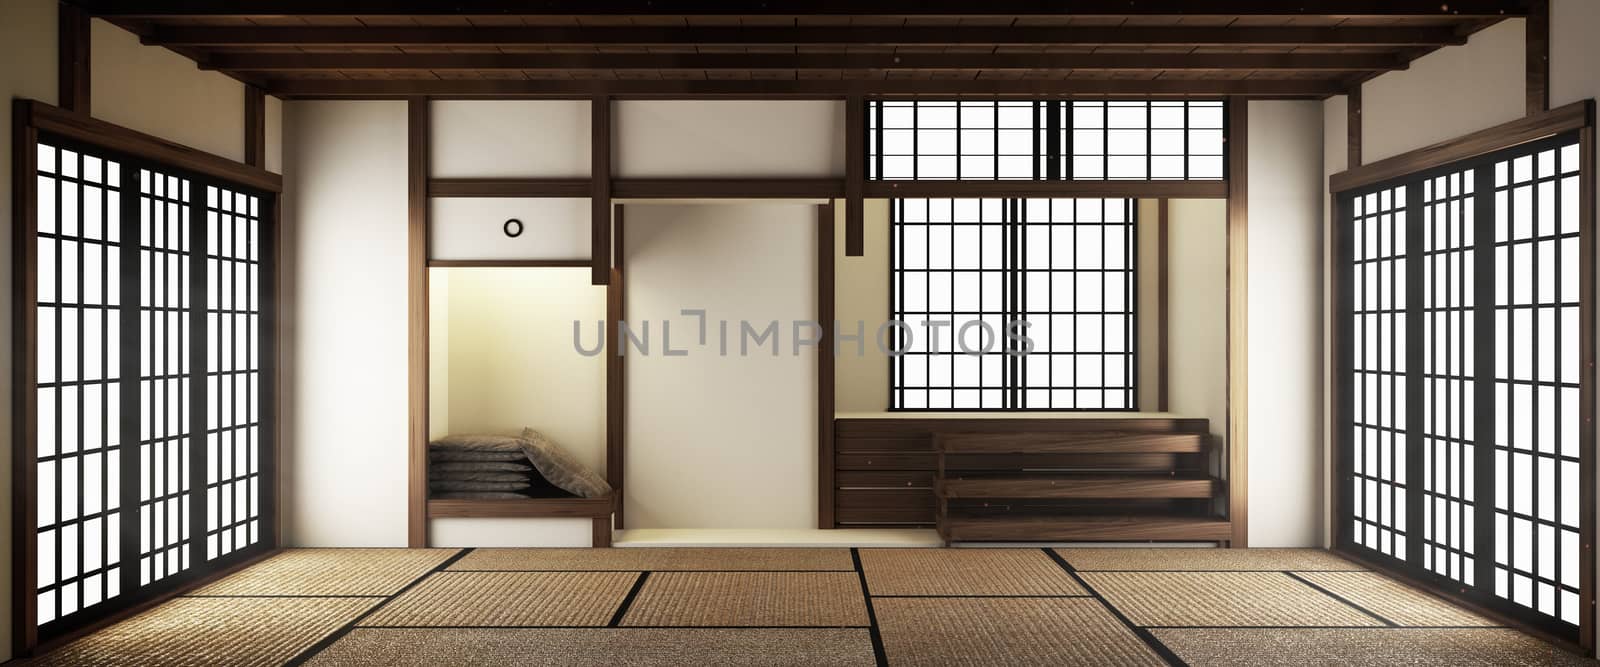 Interior Luxury modern Japanese style Living room mock up, Designing the most beautiful. 3D rendering